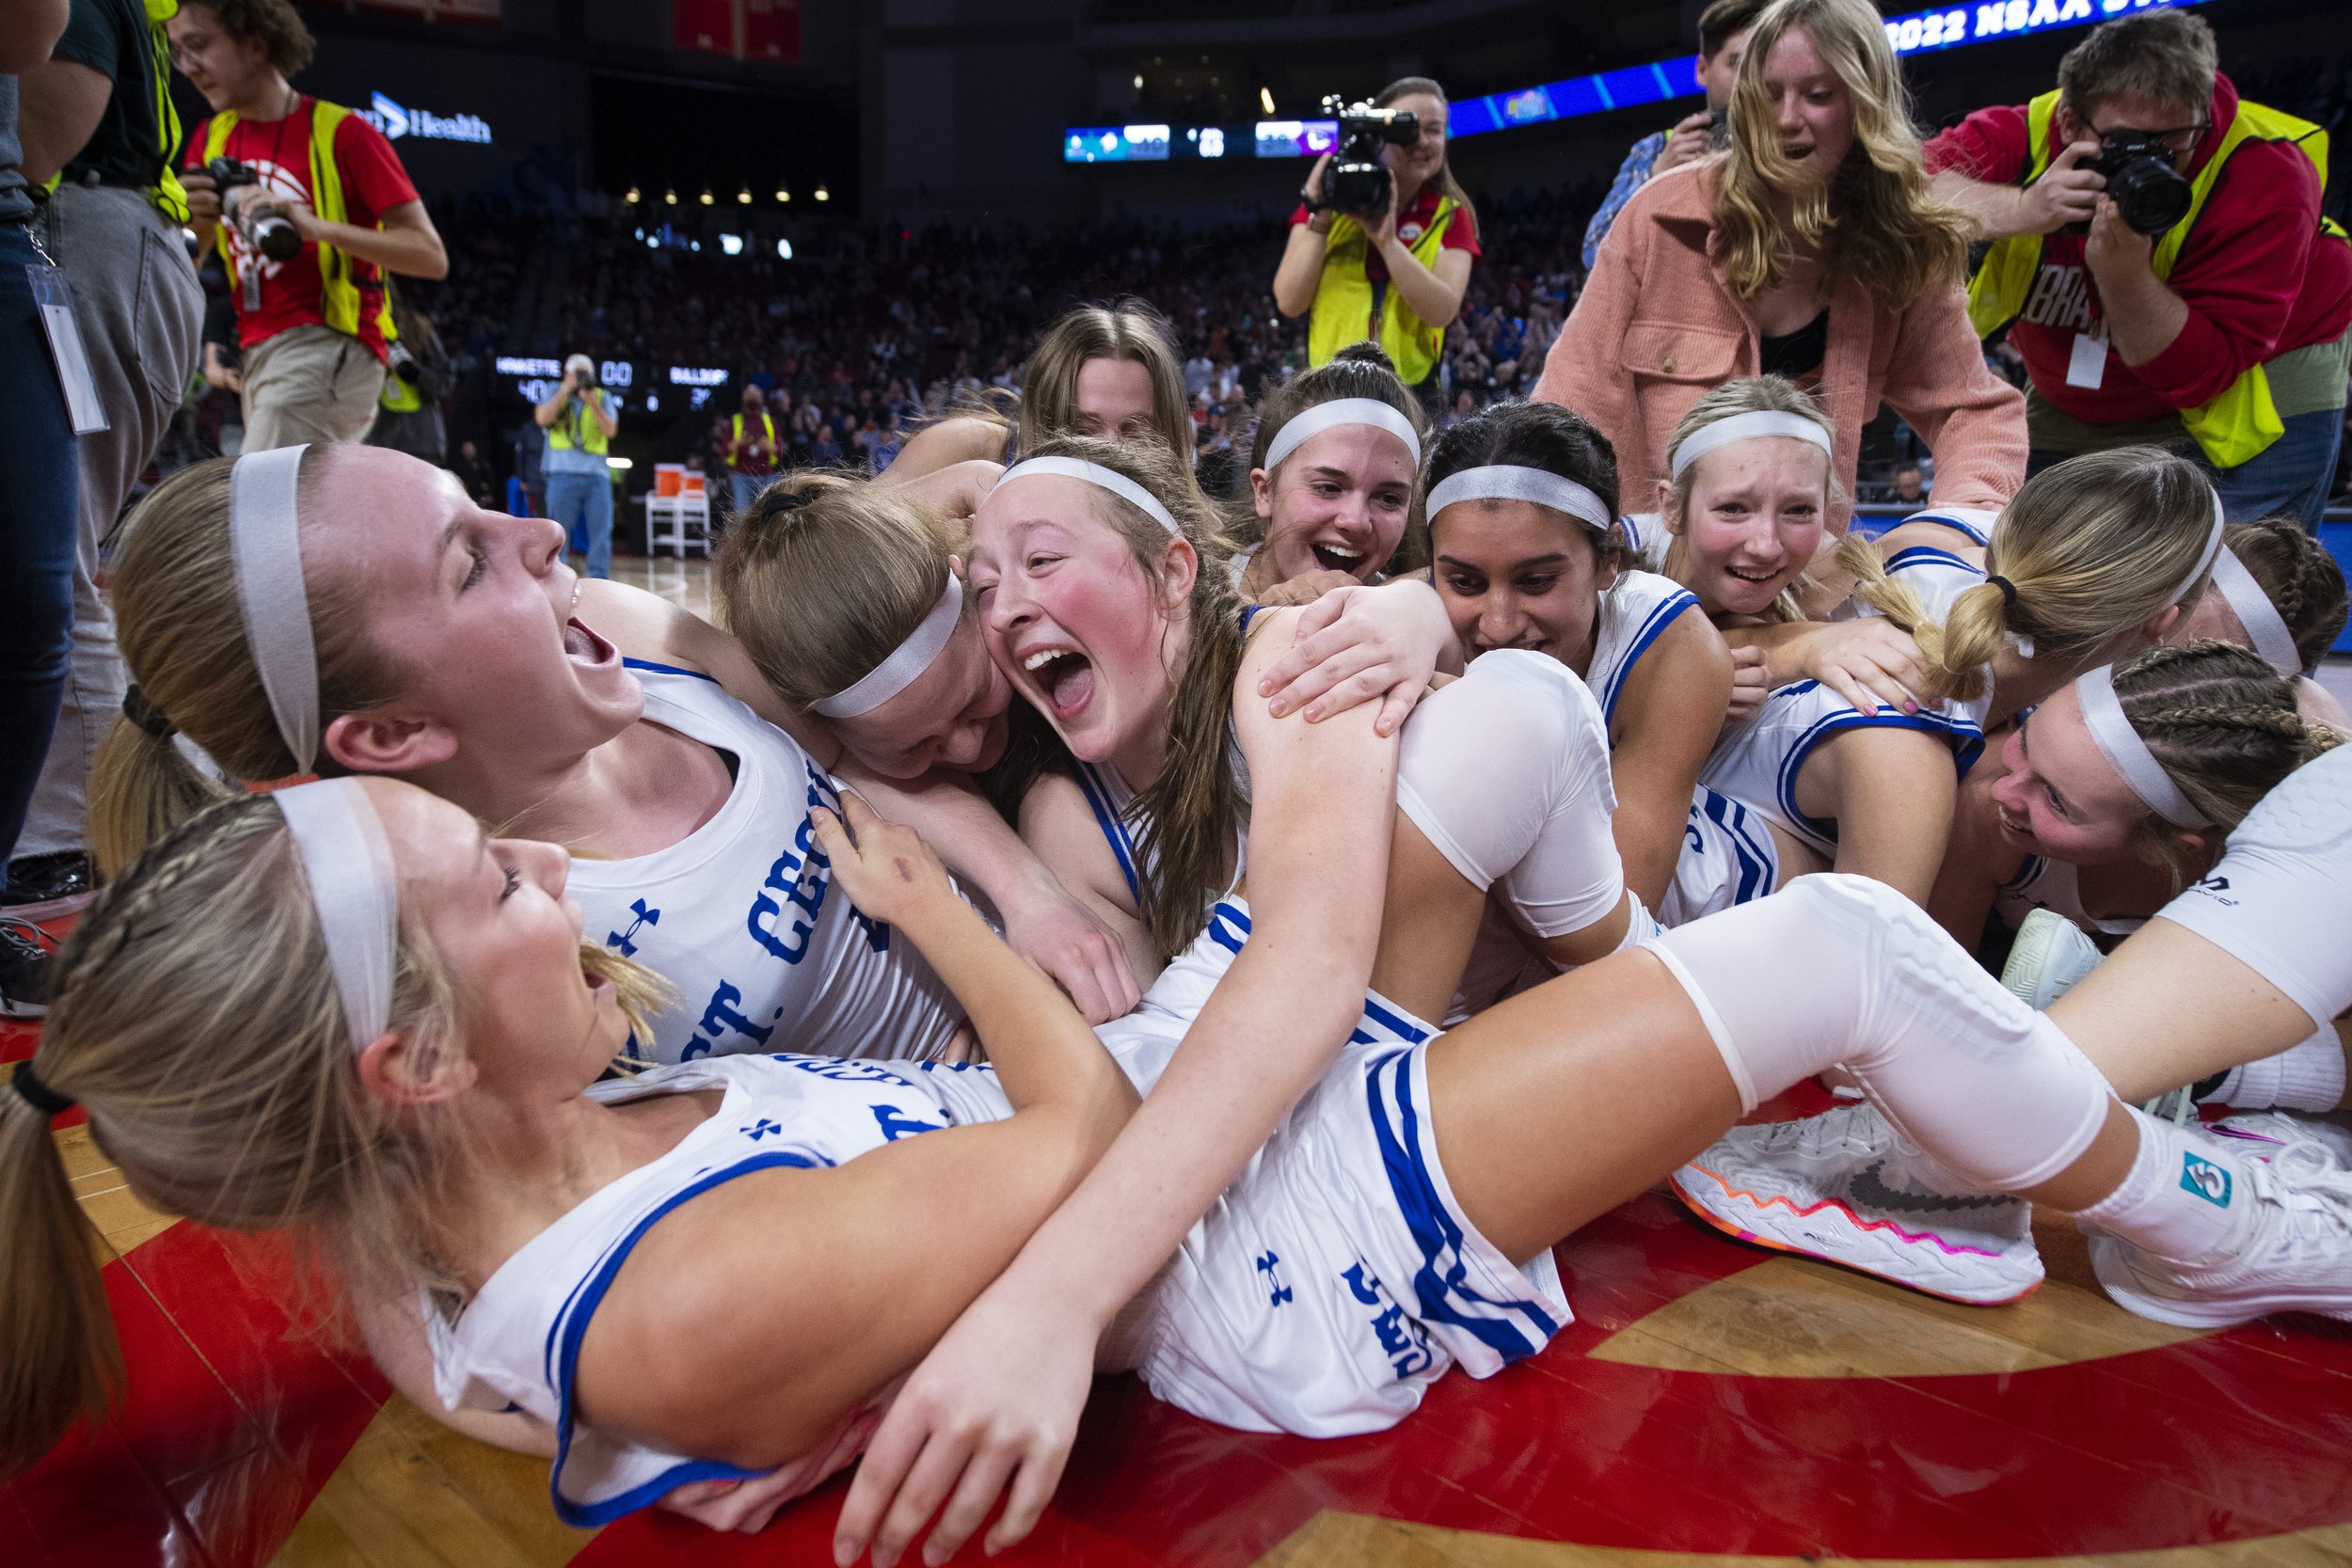  Hastings SC's Erin Sheehy(bottom left) is dog pilled by her team at the center of the court after they defeated Bridgeport during the Class C-2 girls championship at Pinnacle Bank Arena on March 12, 2022, in Lincoln, Nebraska. 